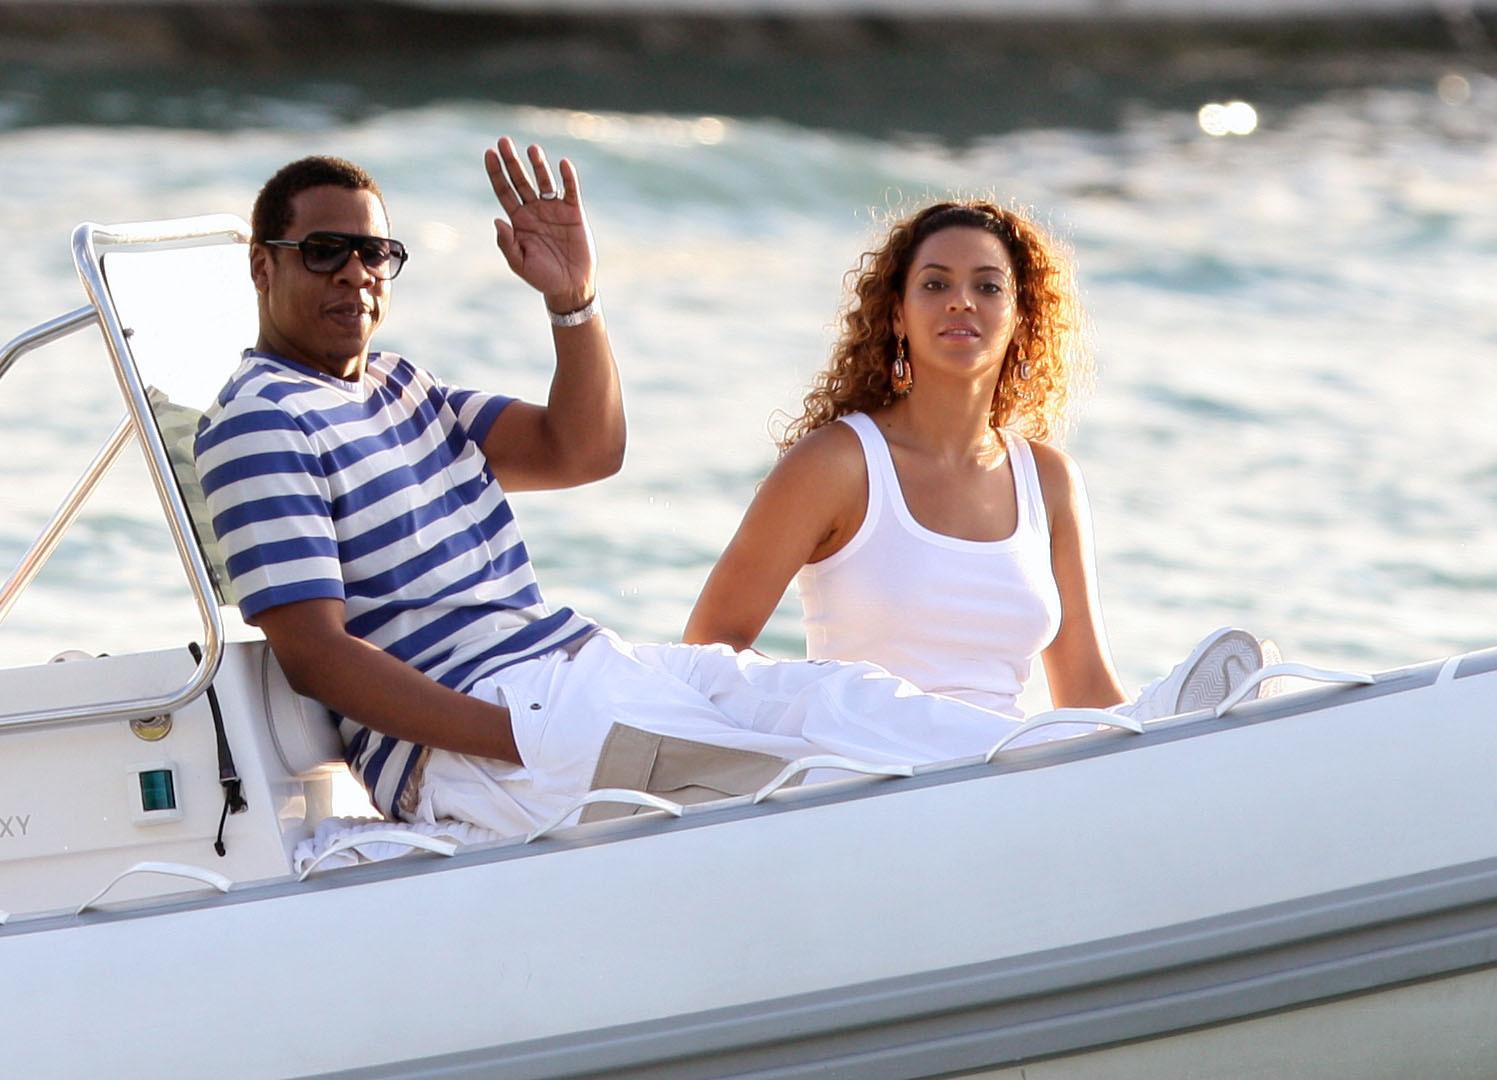 http://www.upscaleswagger.com/wp-content/uploads/2009/01/beyonce-and-jay-z-visit-st-barts.jpg